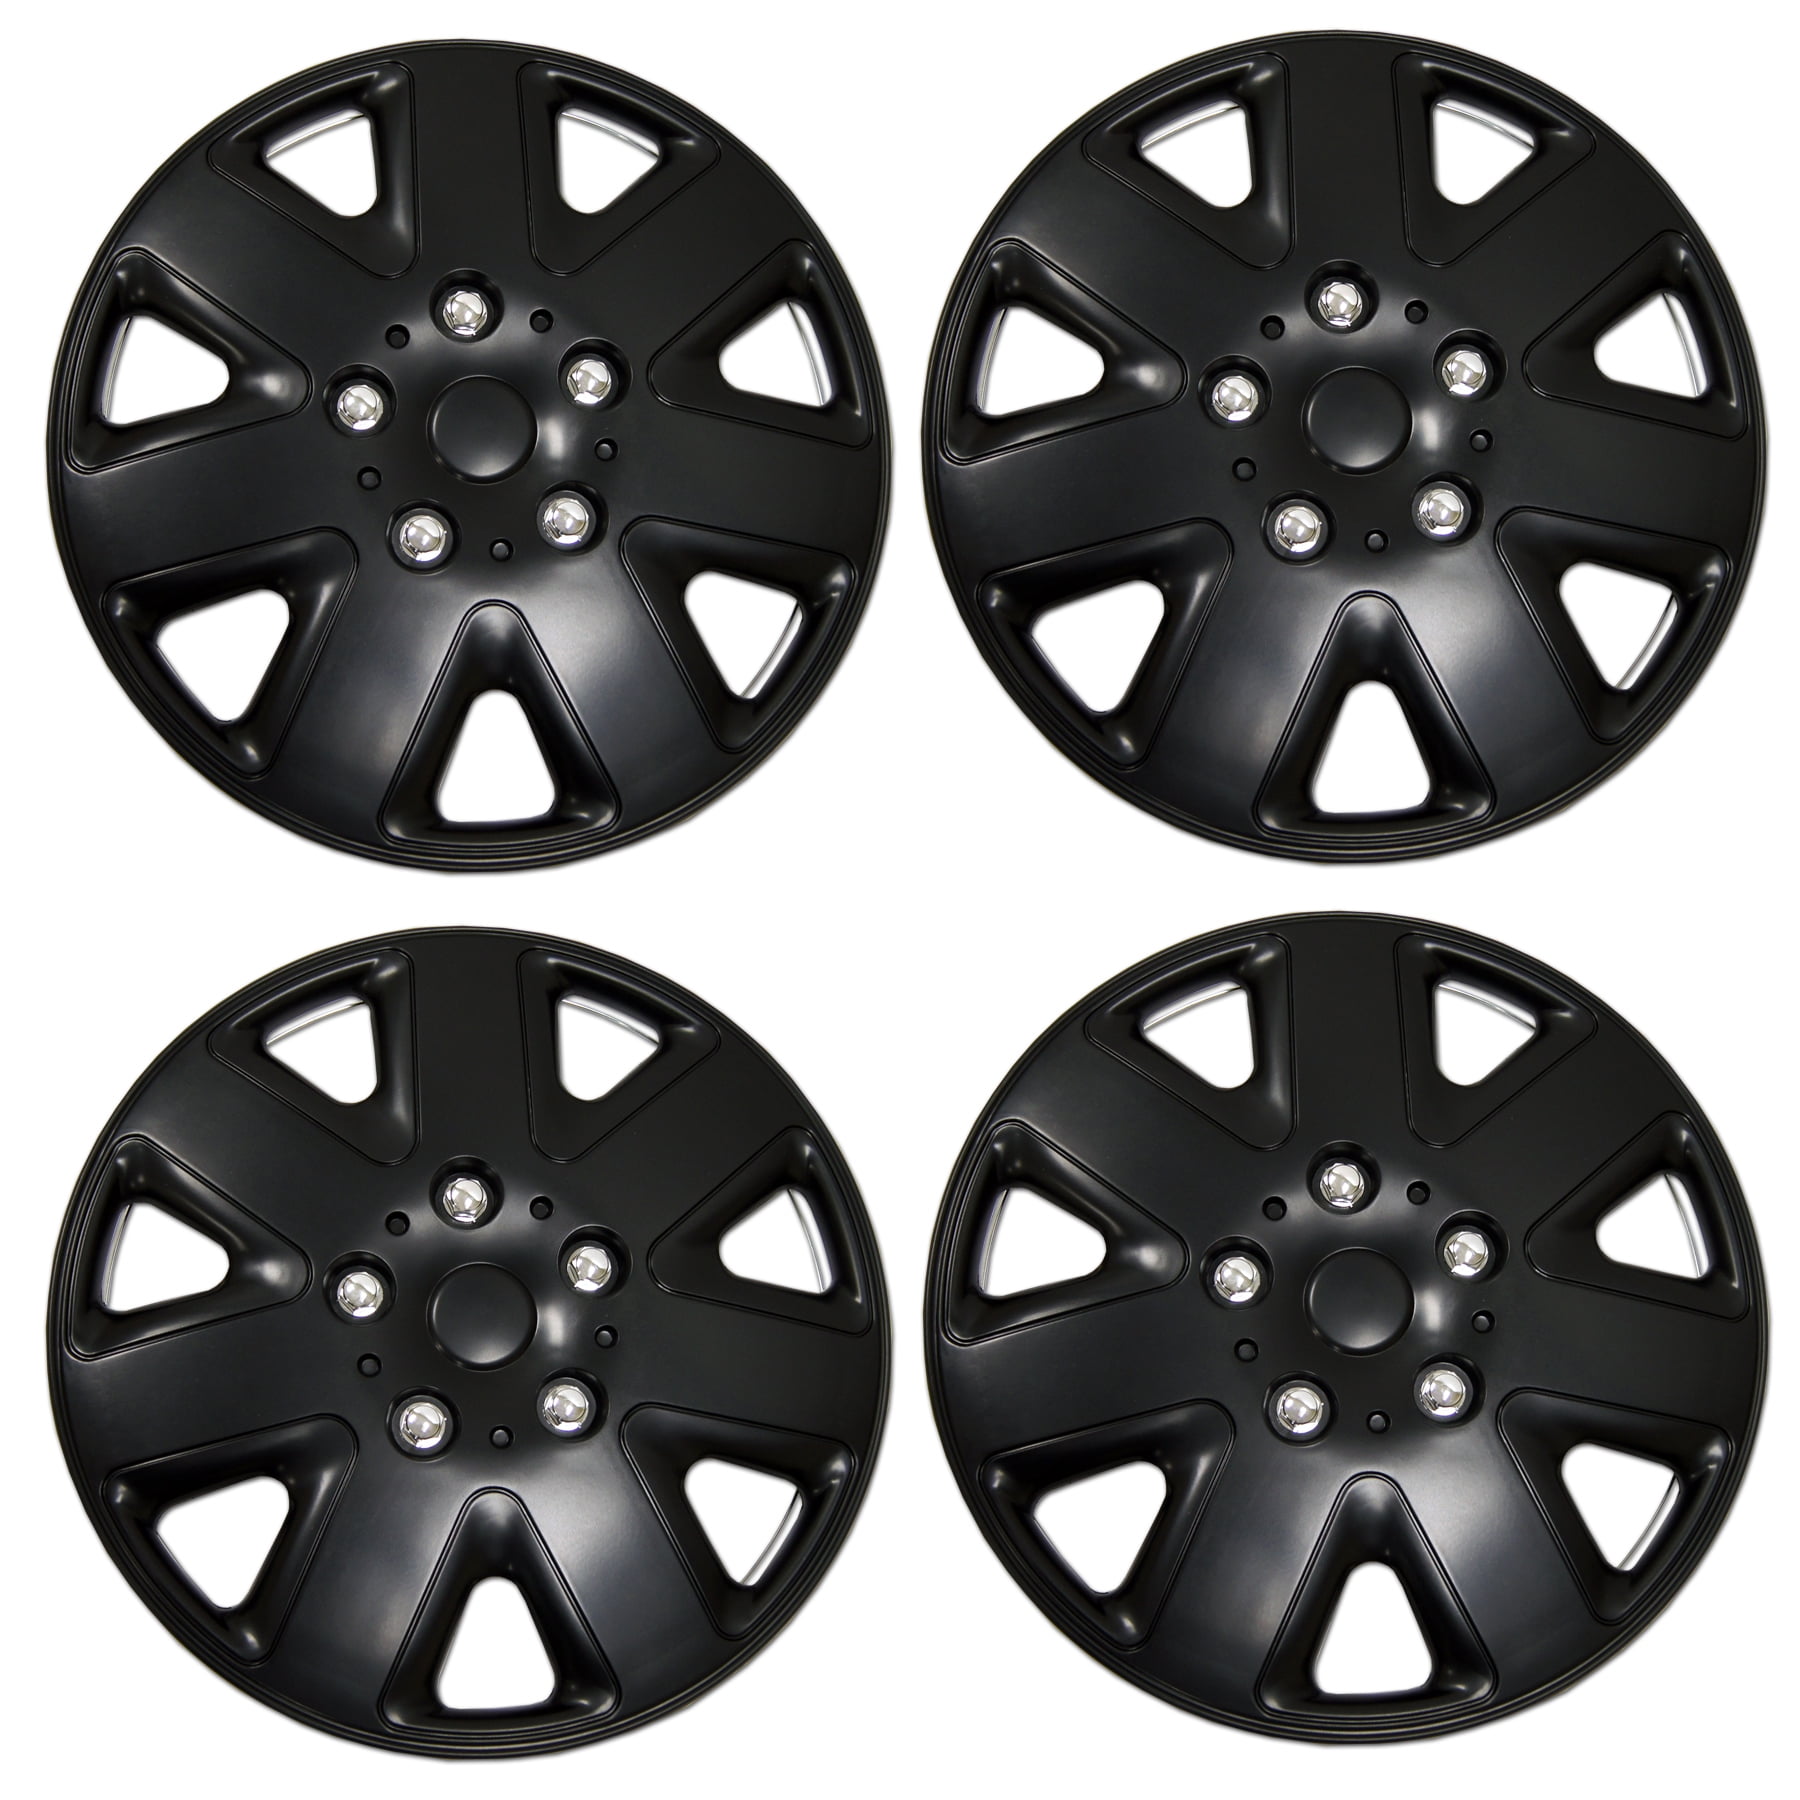 17 Inches #054 17" Inch Snap On Matte Black Hubcap Wheel Cover Rim Covers 4pc 